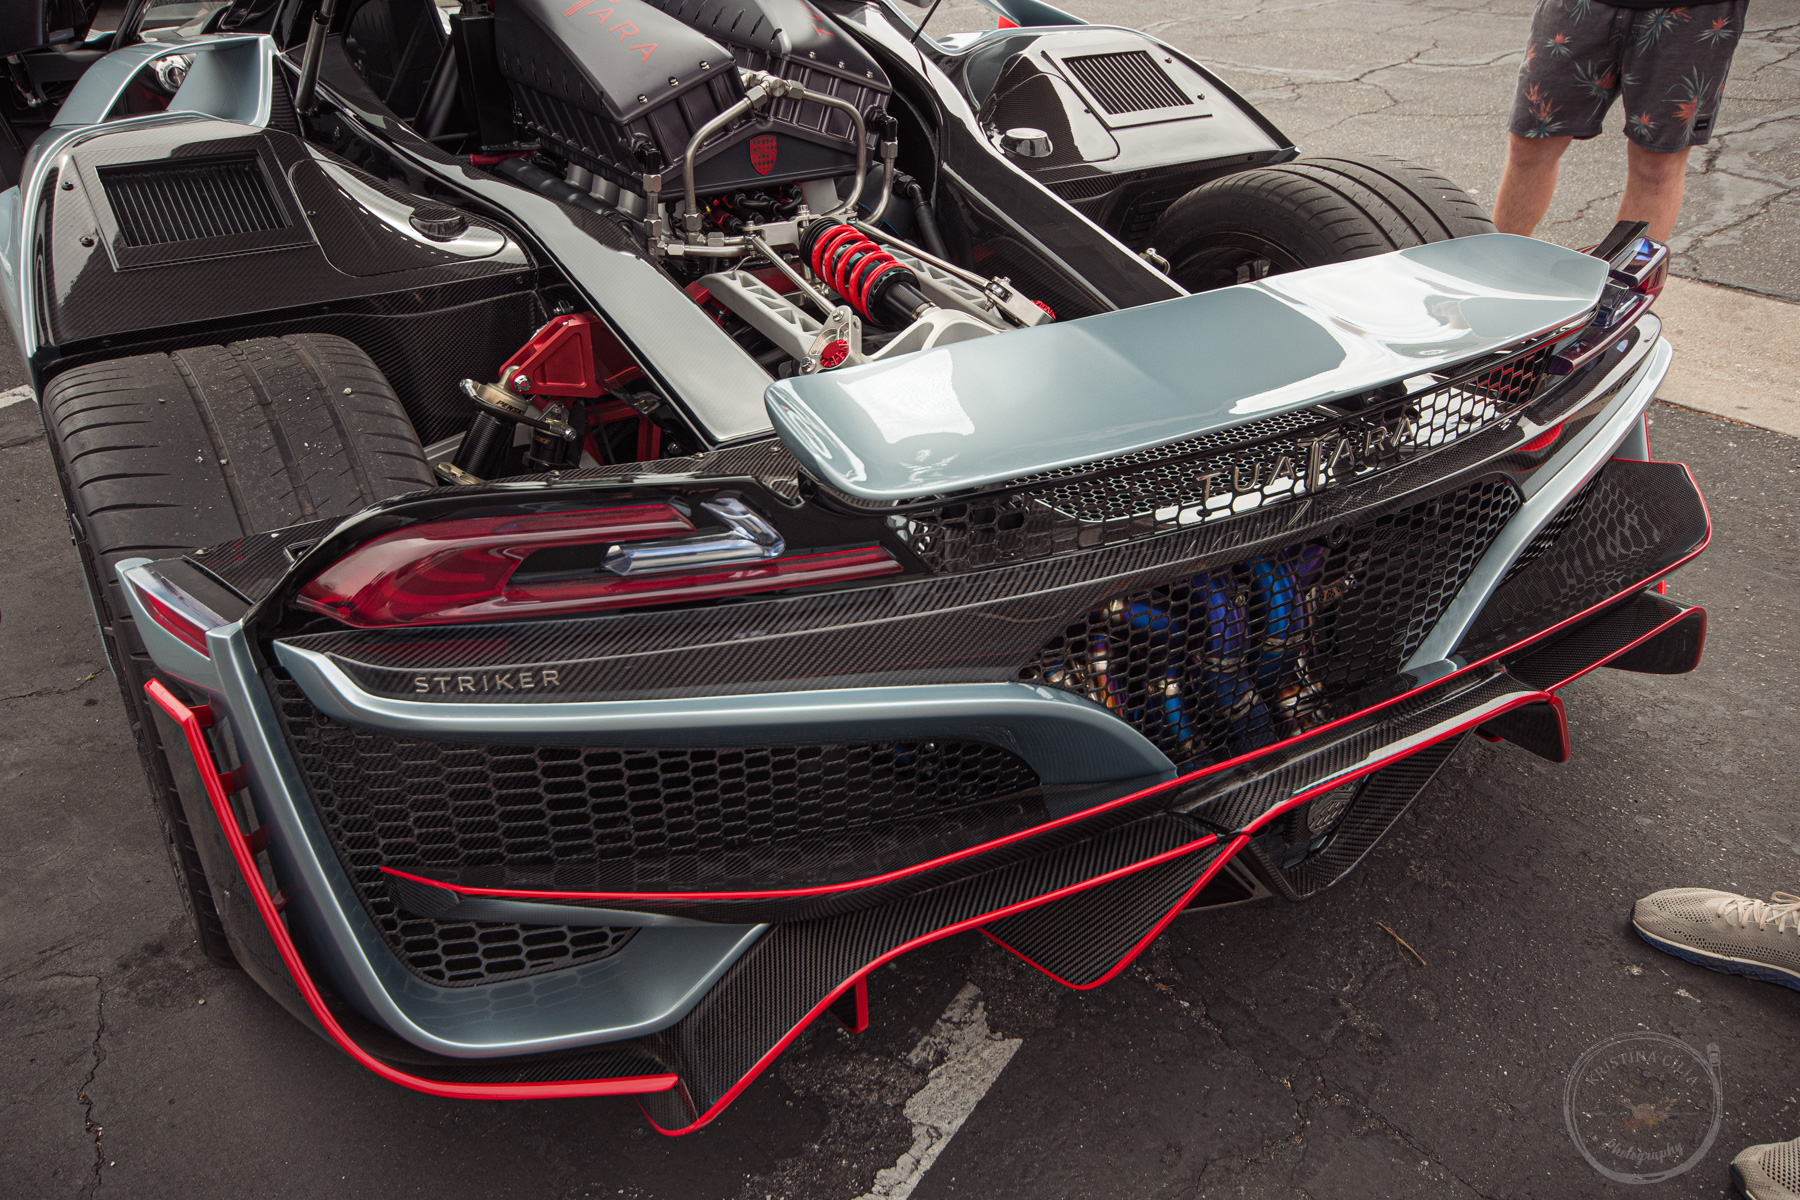 SSC Tuatara Striker engine compartment and rear end